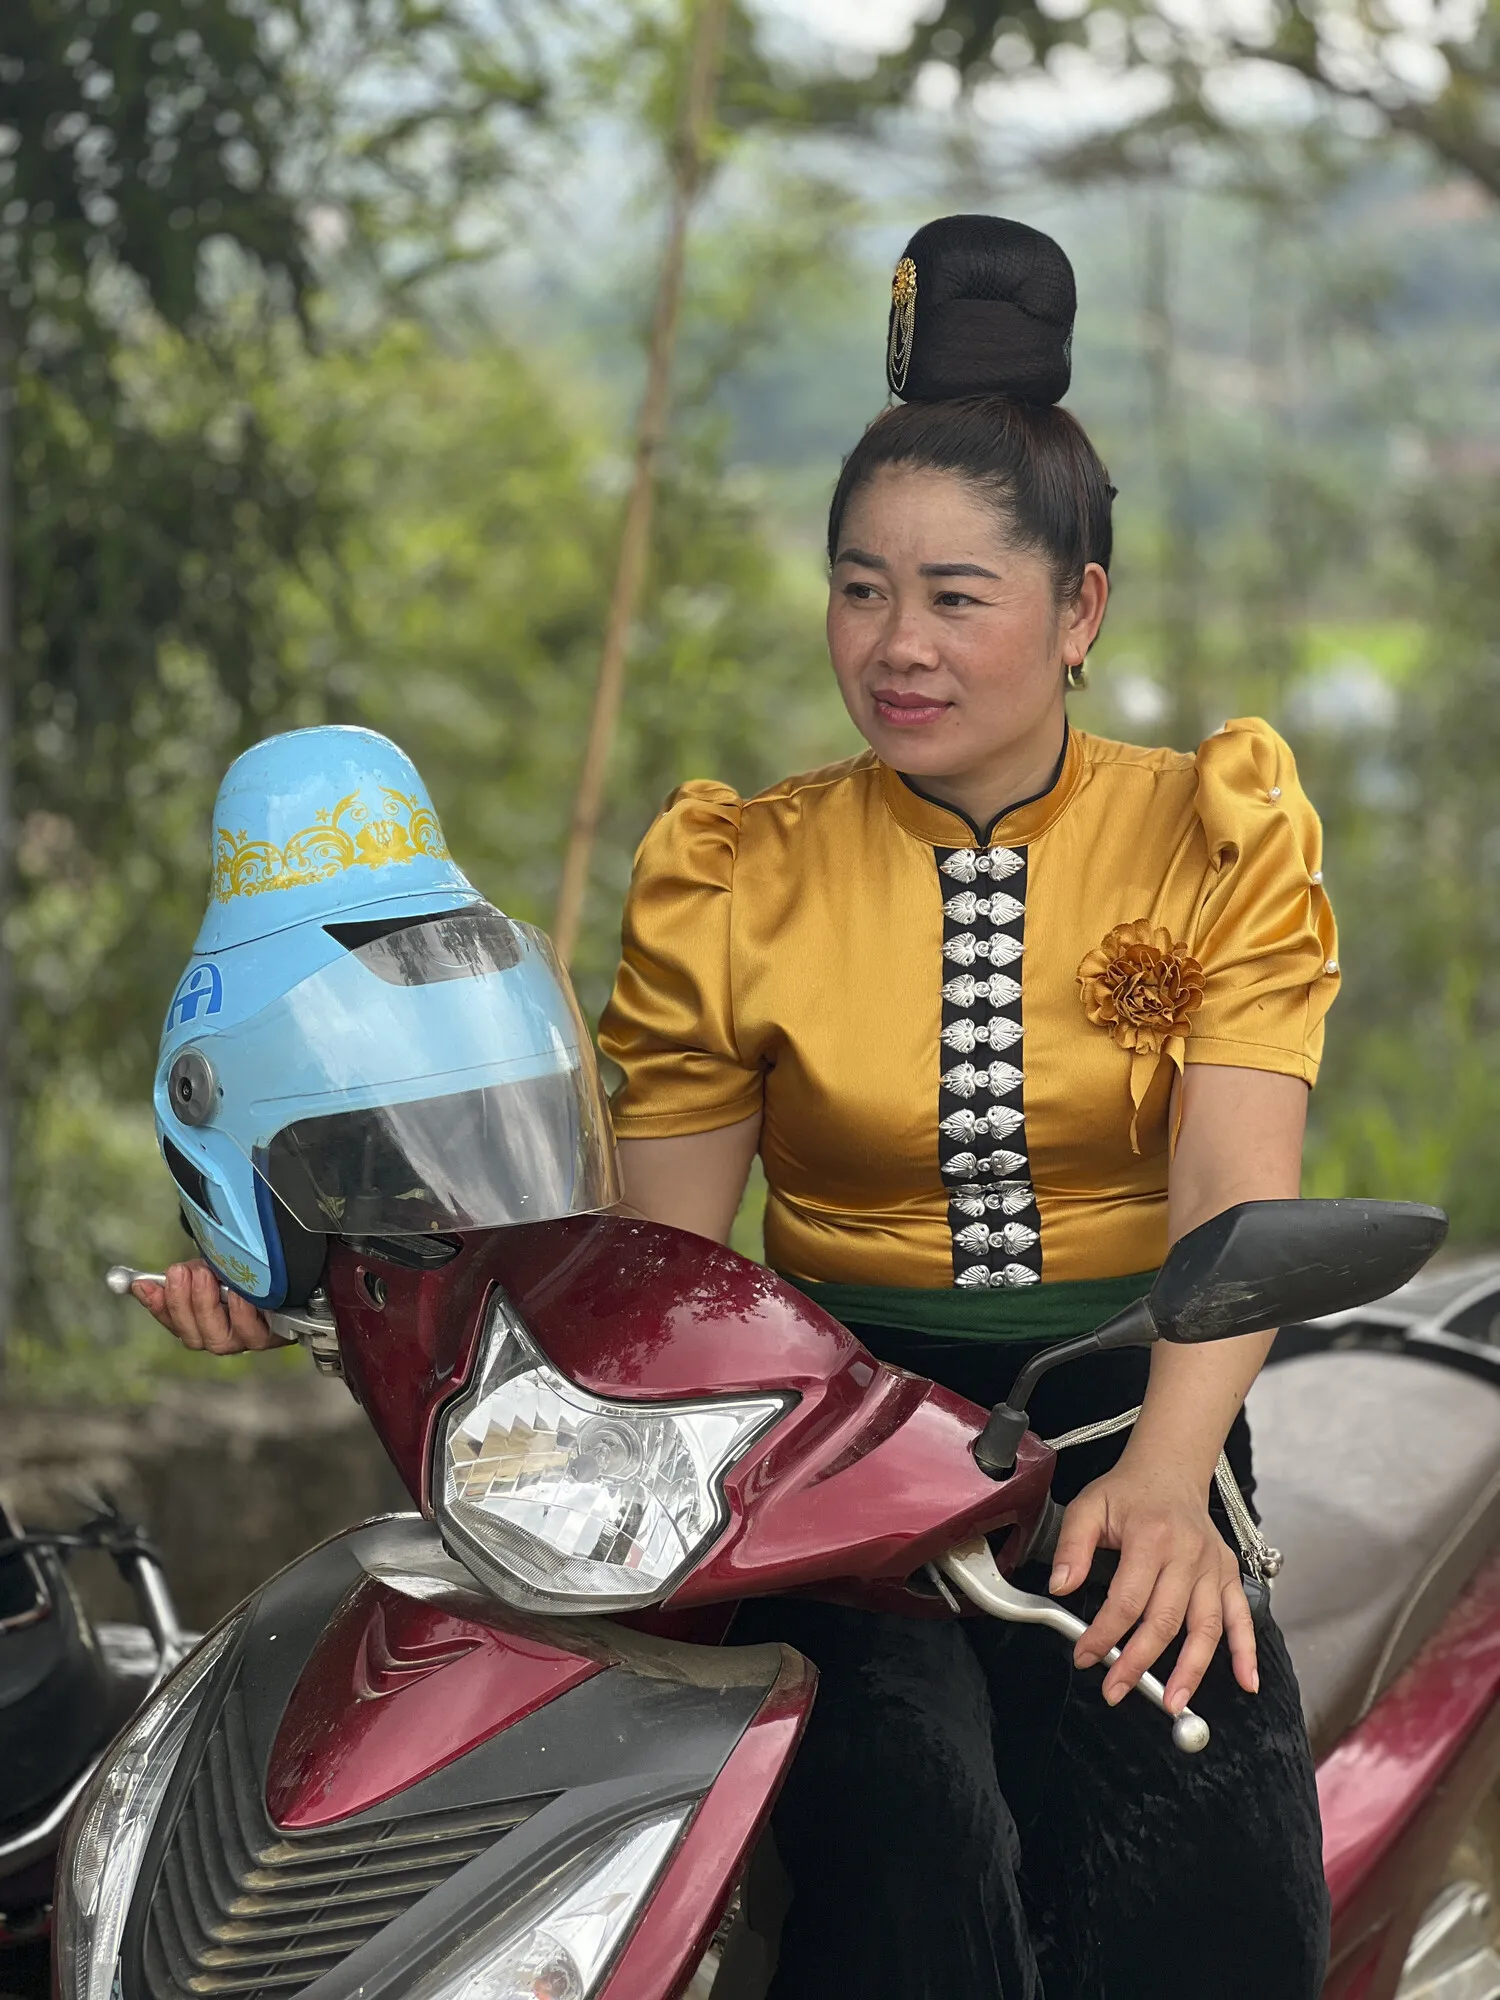 Woman in traditional dress sitting on a motorcycle